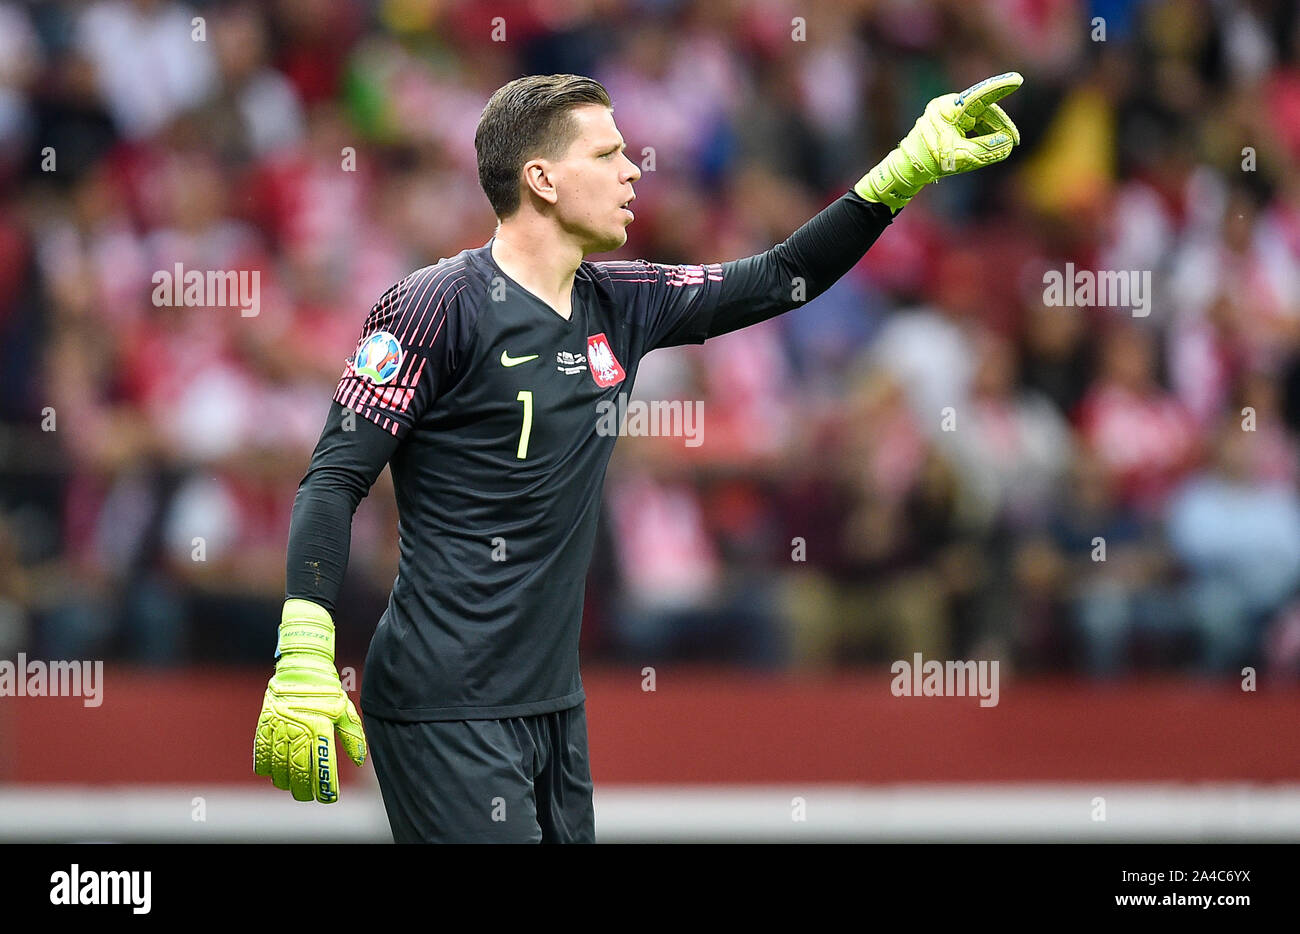 Warsaw, Poland. 13th Oct, 2019. Wojciech Szczesny of Poland reacts during the UEFA Euro 2020 qualifier Group G match between Poland and North Macedonia in Warsaw, Poland, Oct. 13, 2019. Credit: Rafal Rusek/Xinhua/Alamy Live News Stock Photo